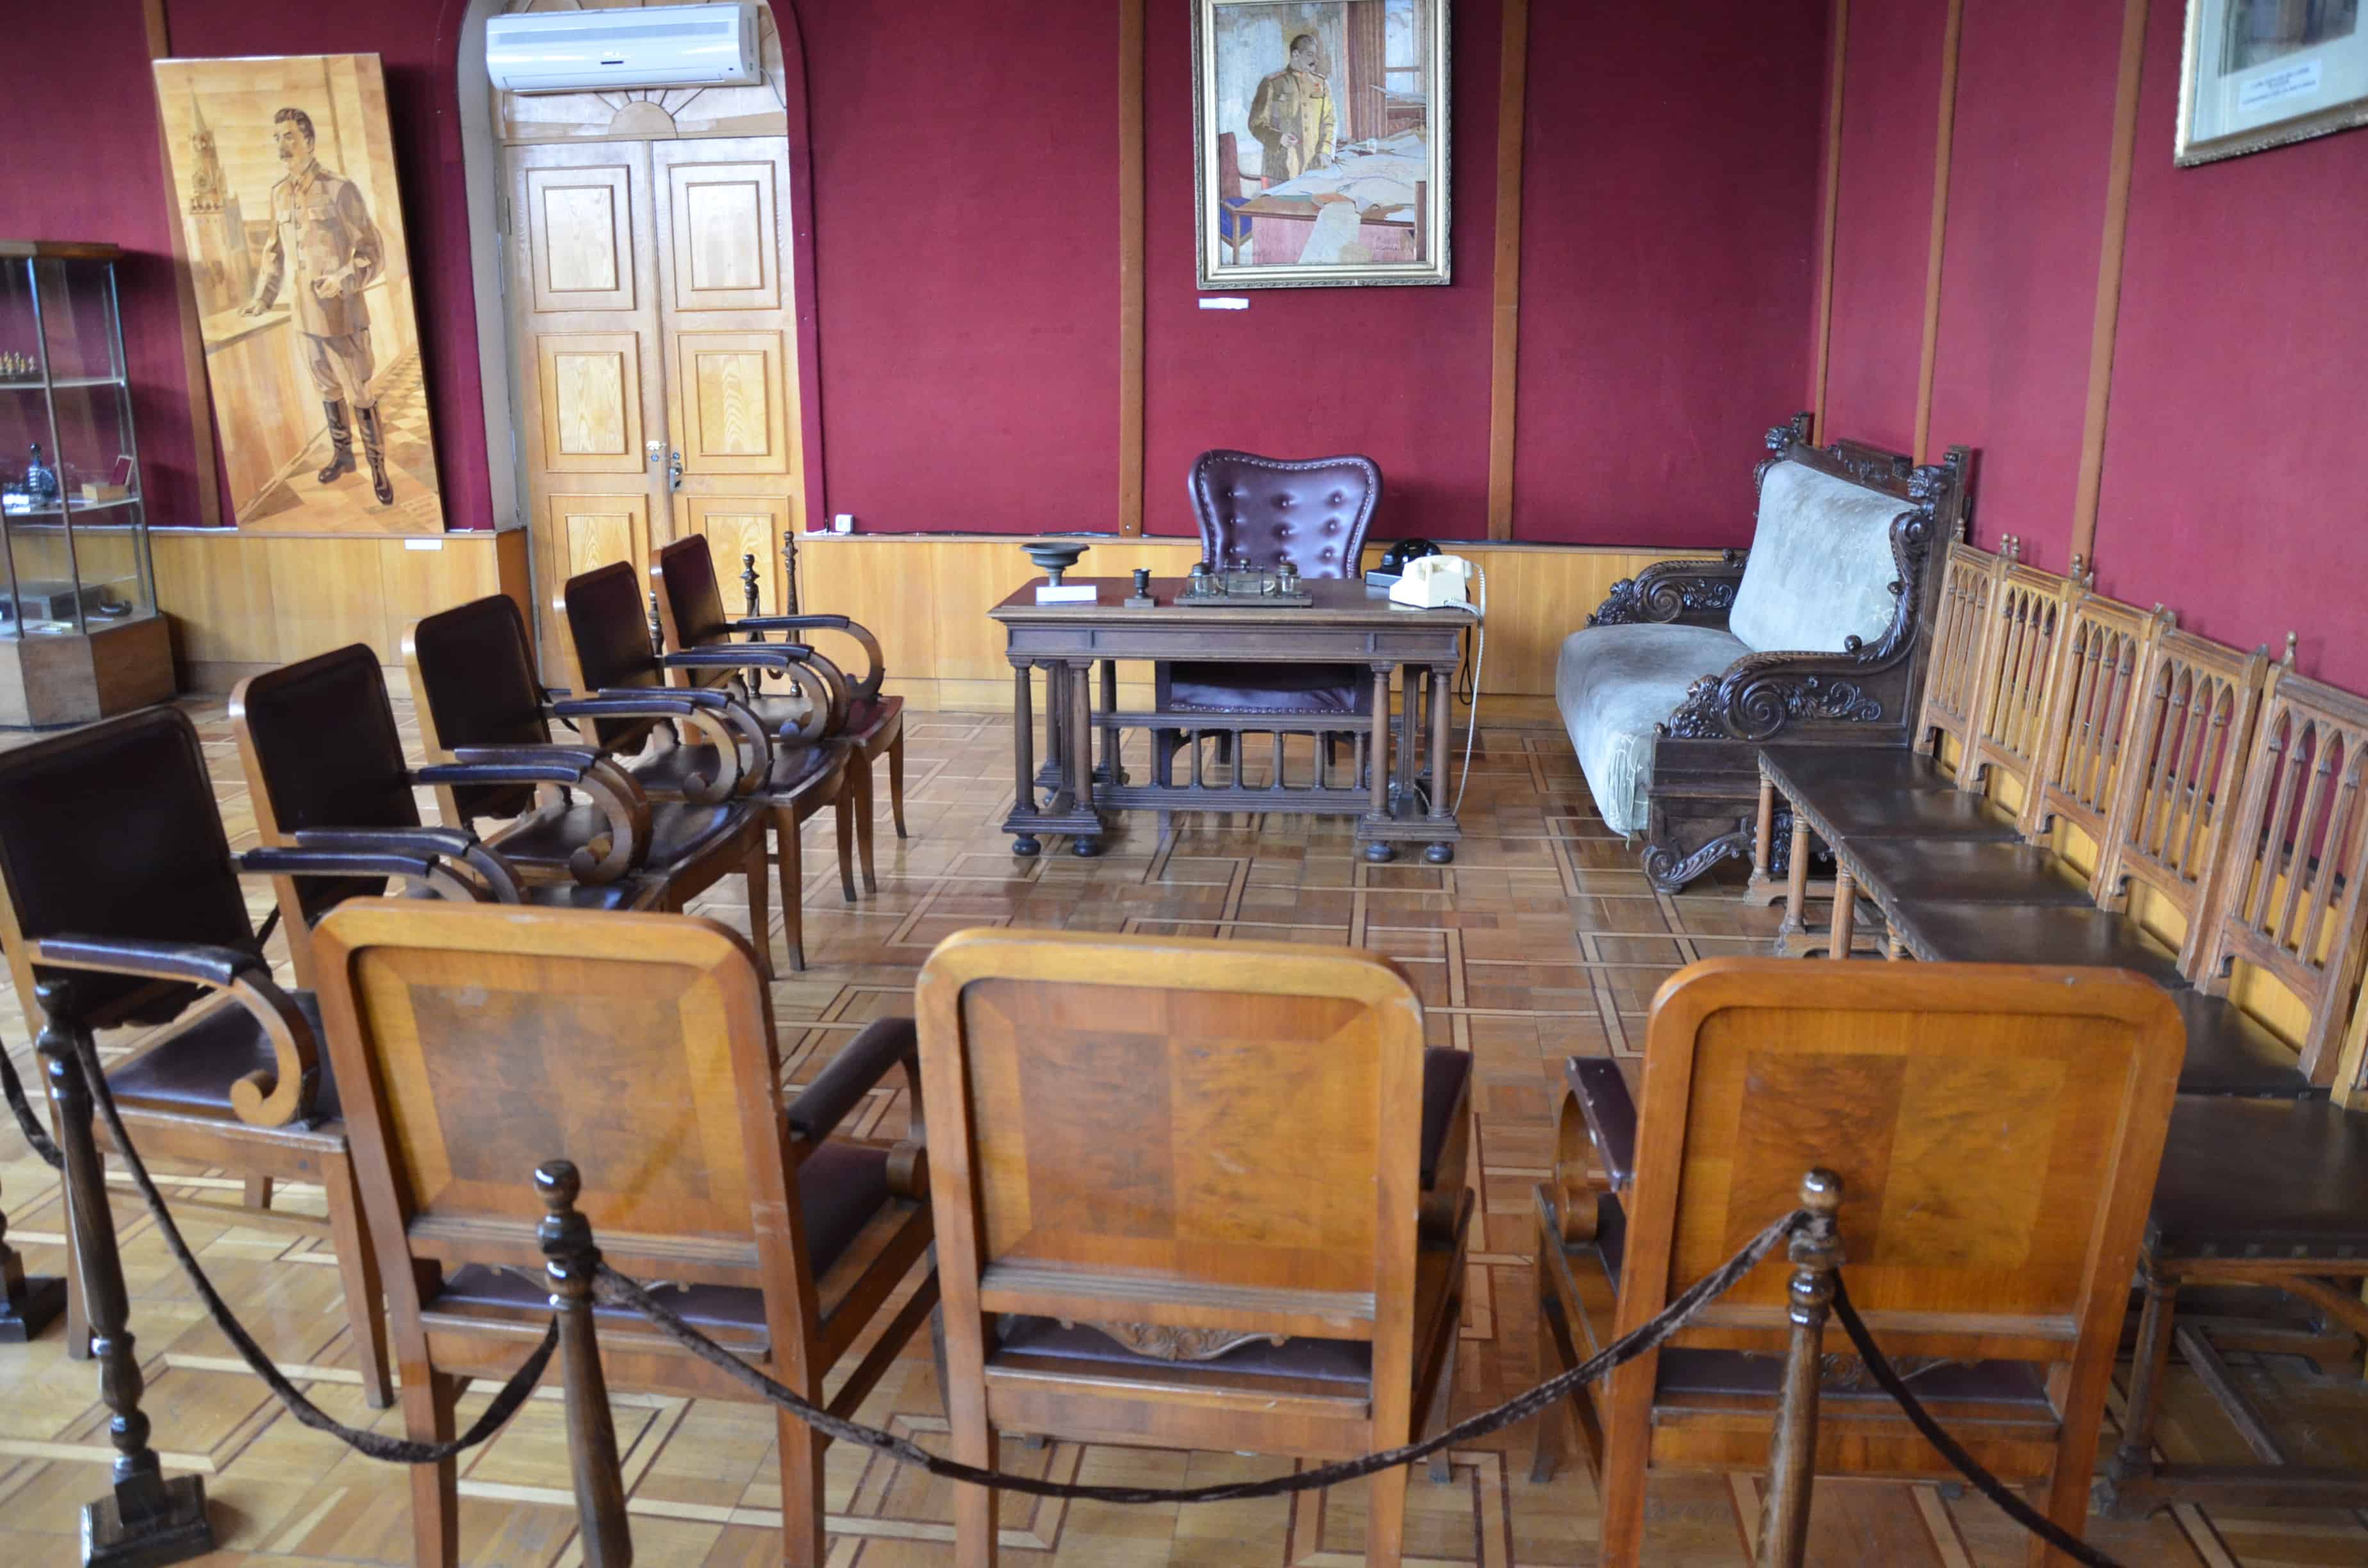 Furniture and desk from Stalin's office at the Kremlin at the Joseph Stalin Museum in Gori, Georgia